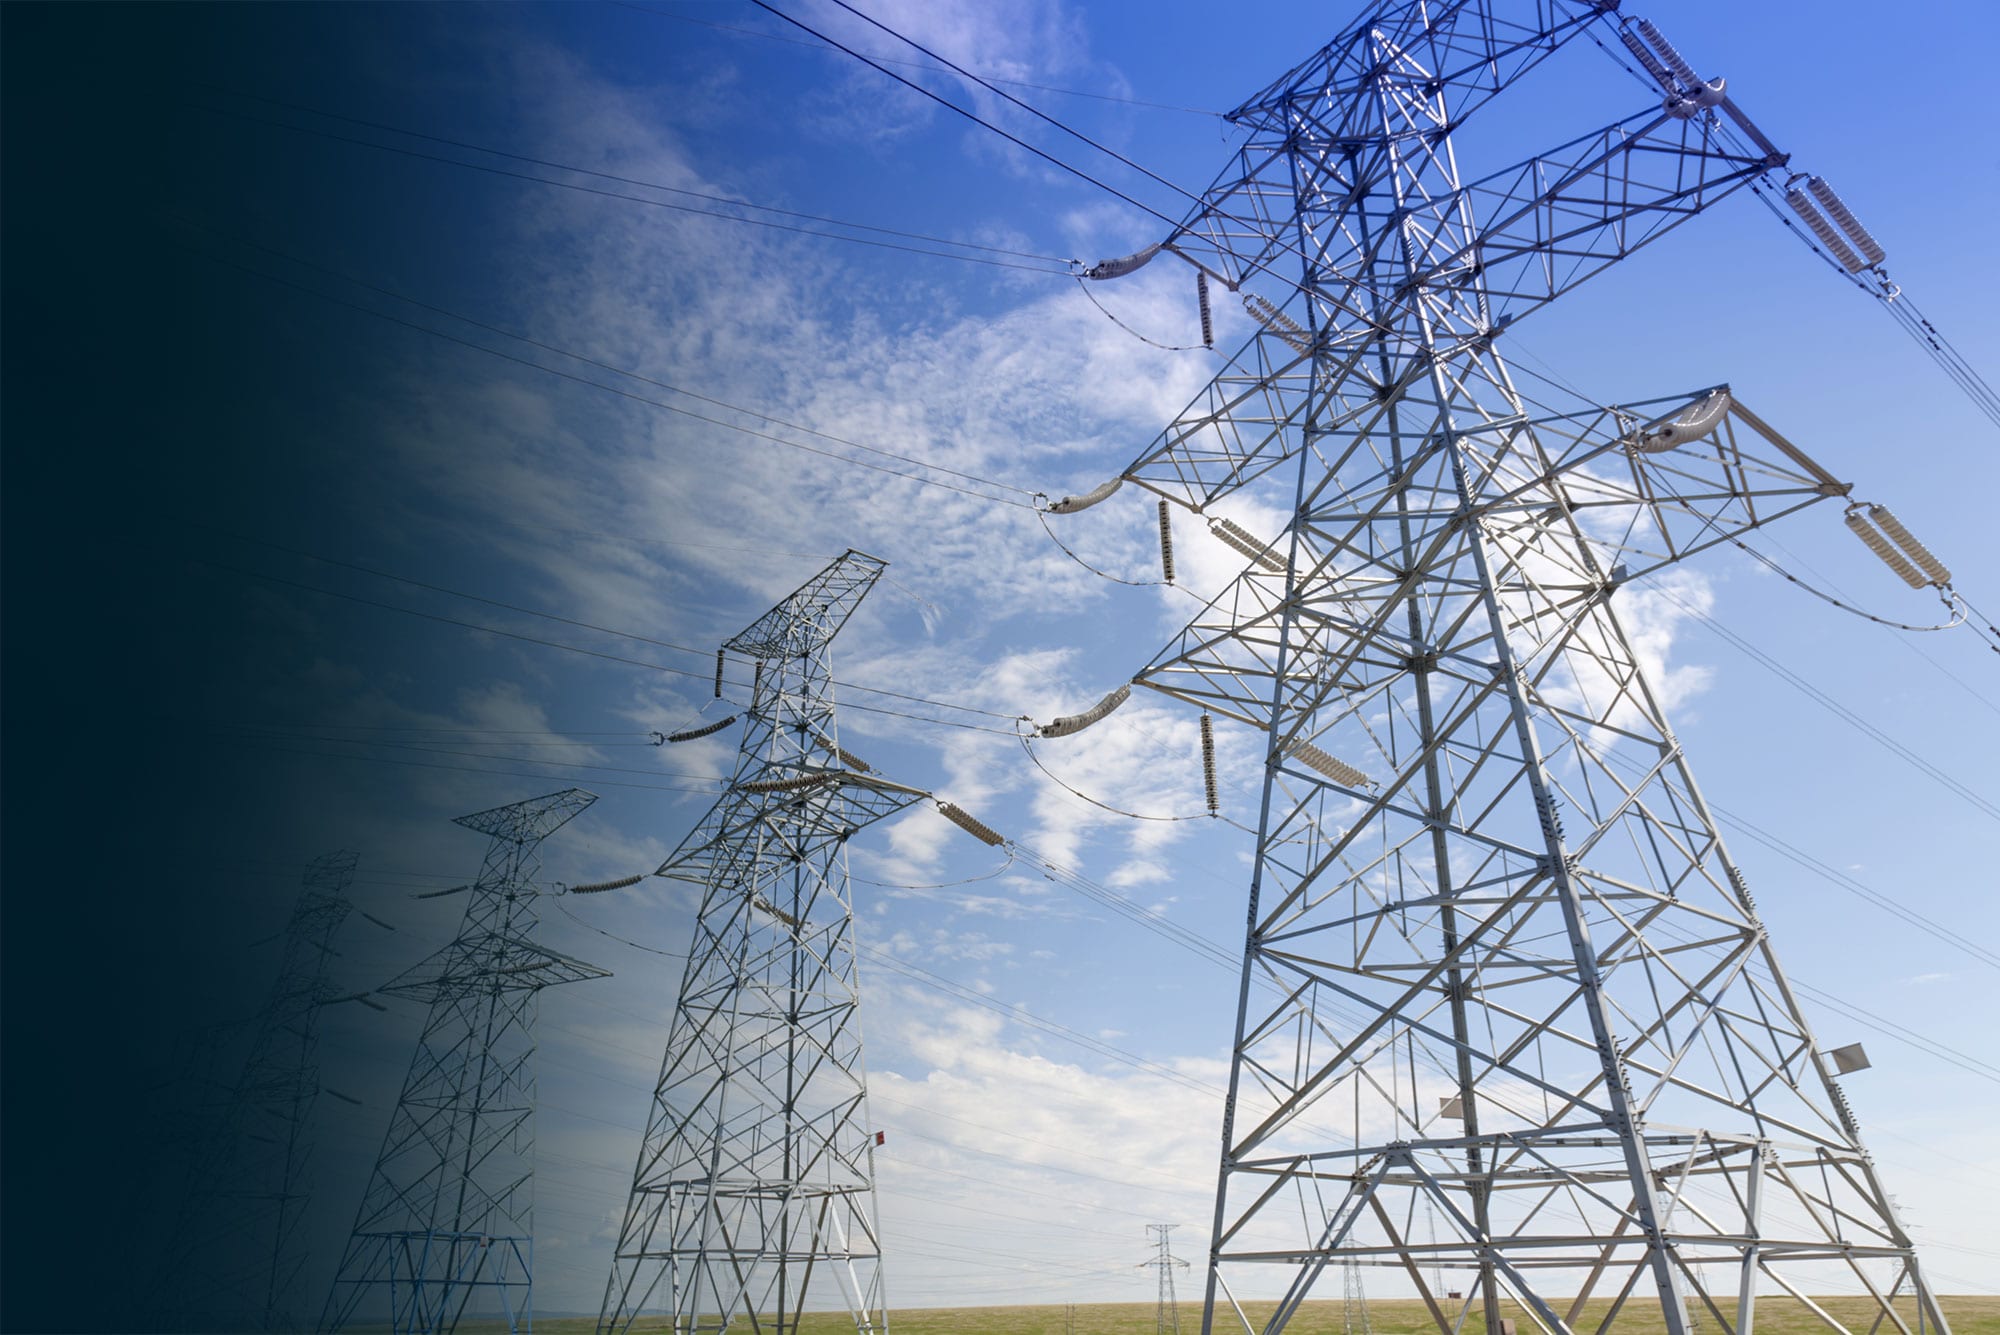 Smart field service software for the utilities industry